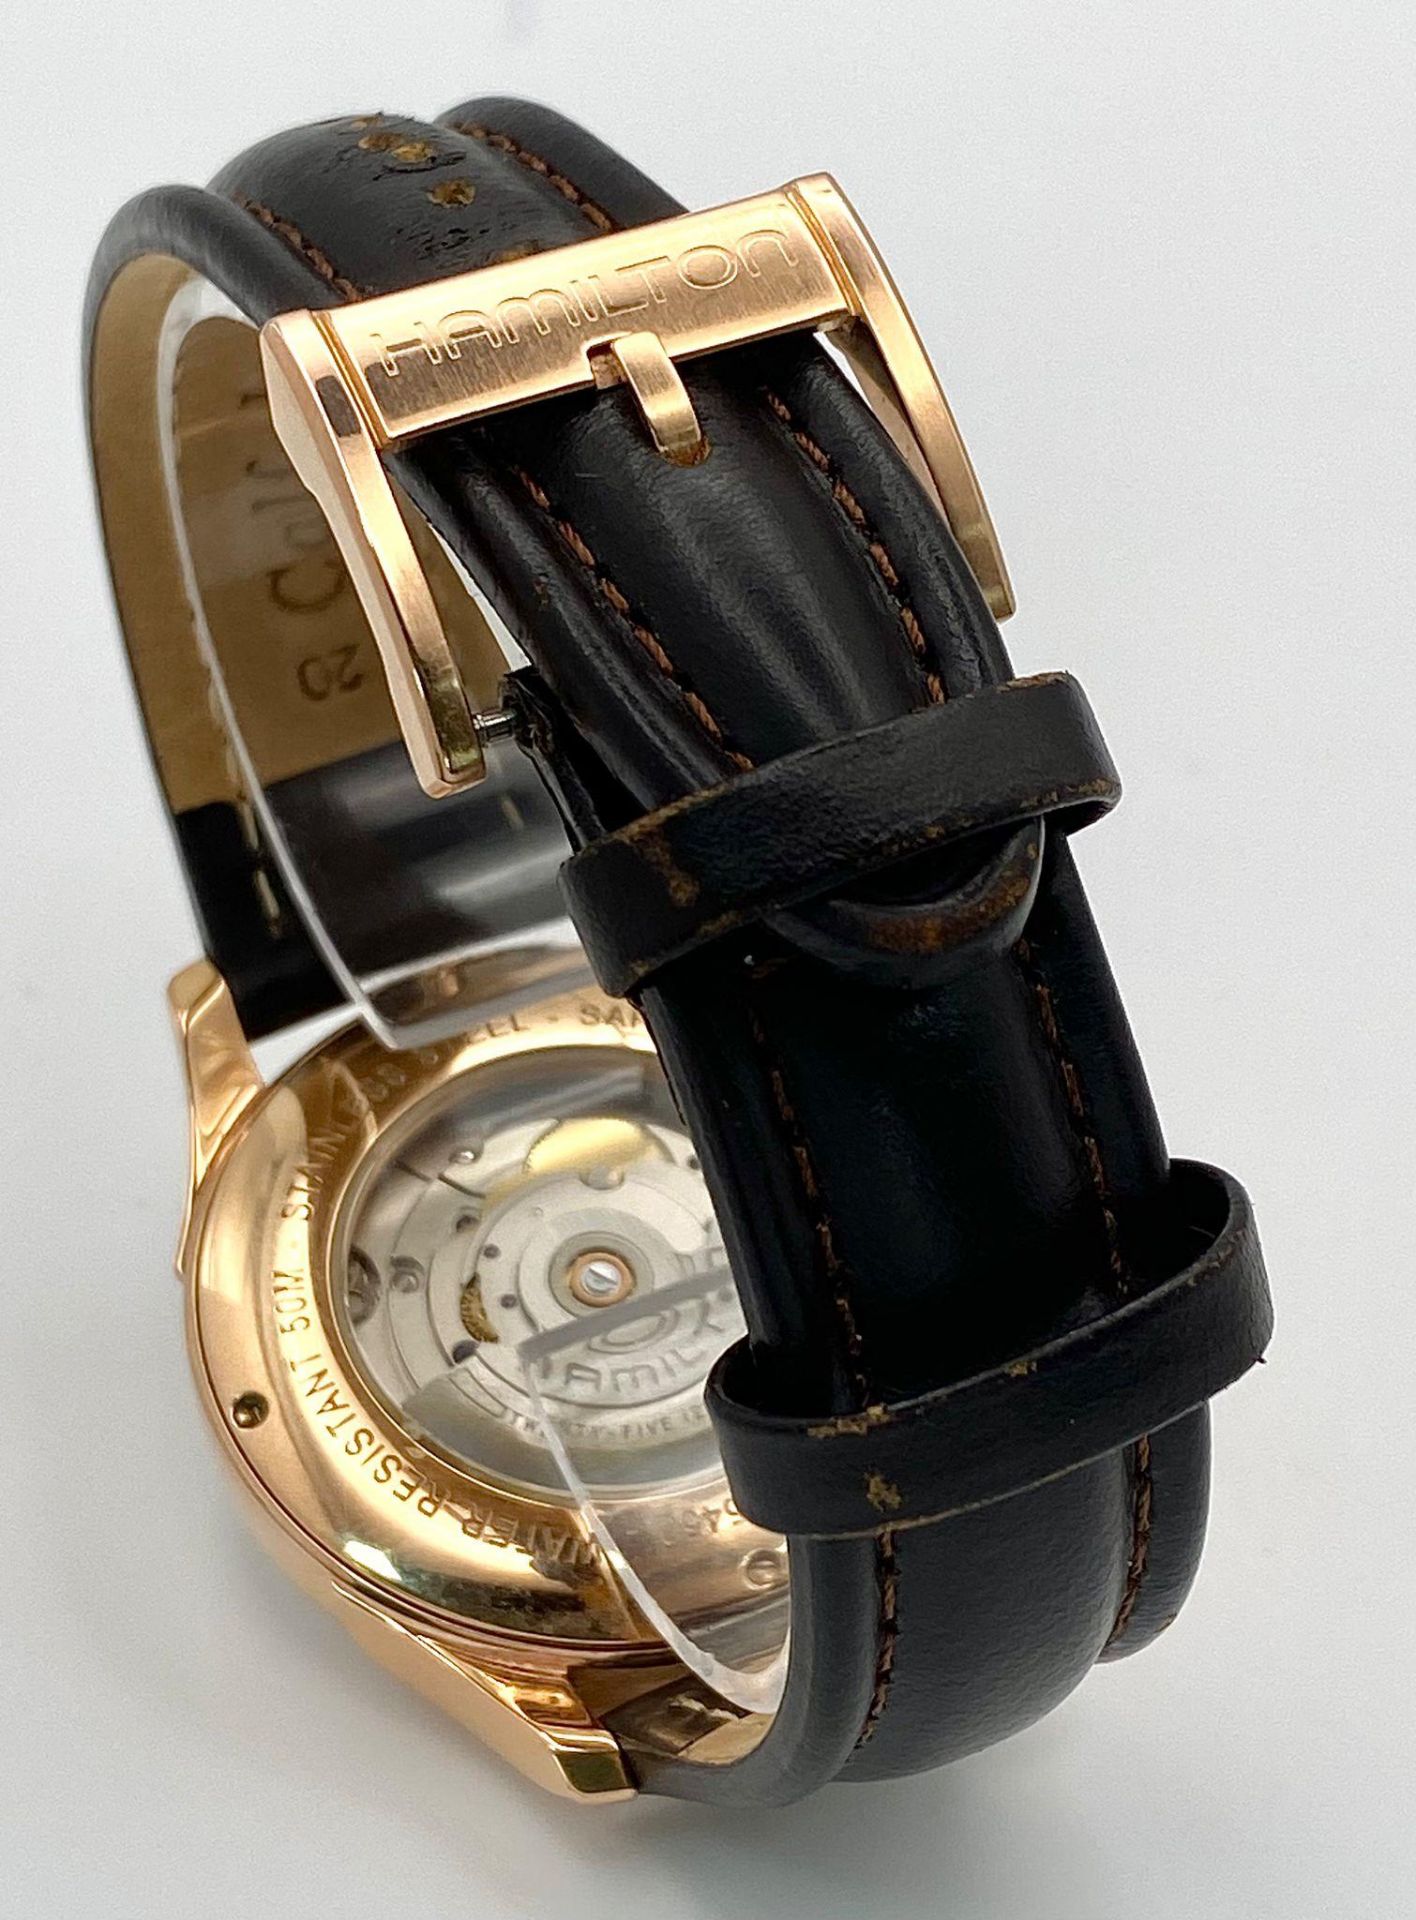 An Excellent Condition Hamilton Viewmatic Jazzmaster Rose Gold Plated Automatic Date Watch Model - Image 6 of 9